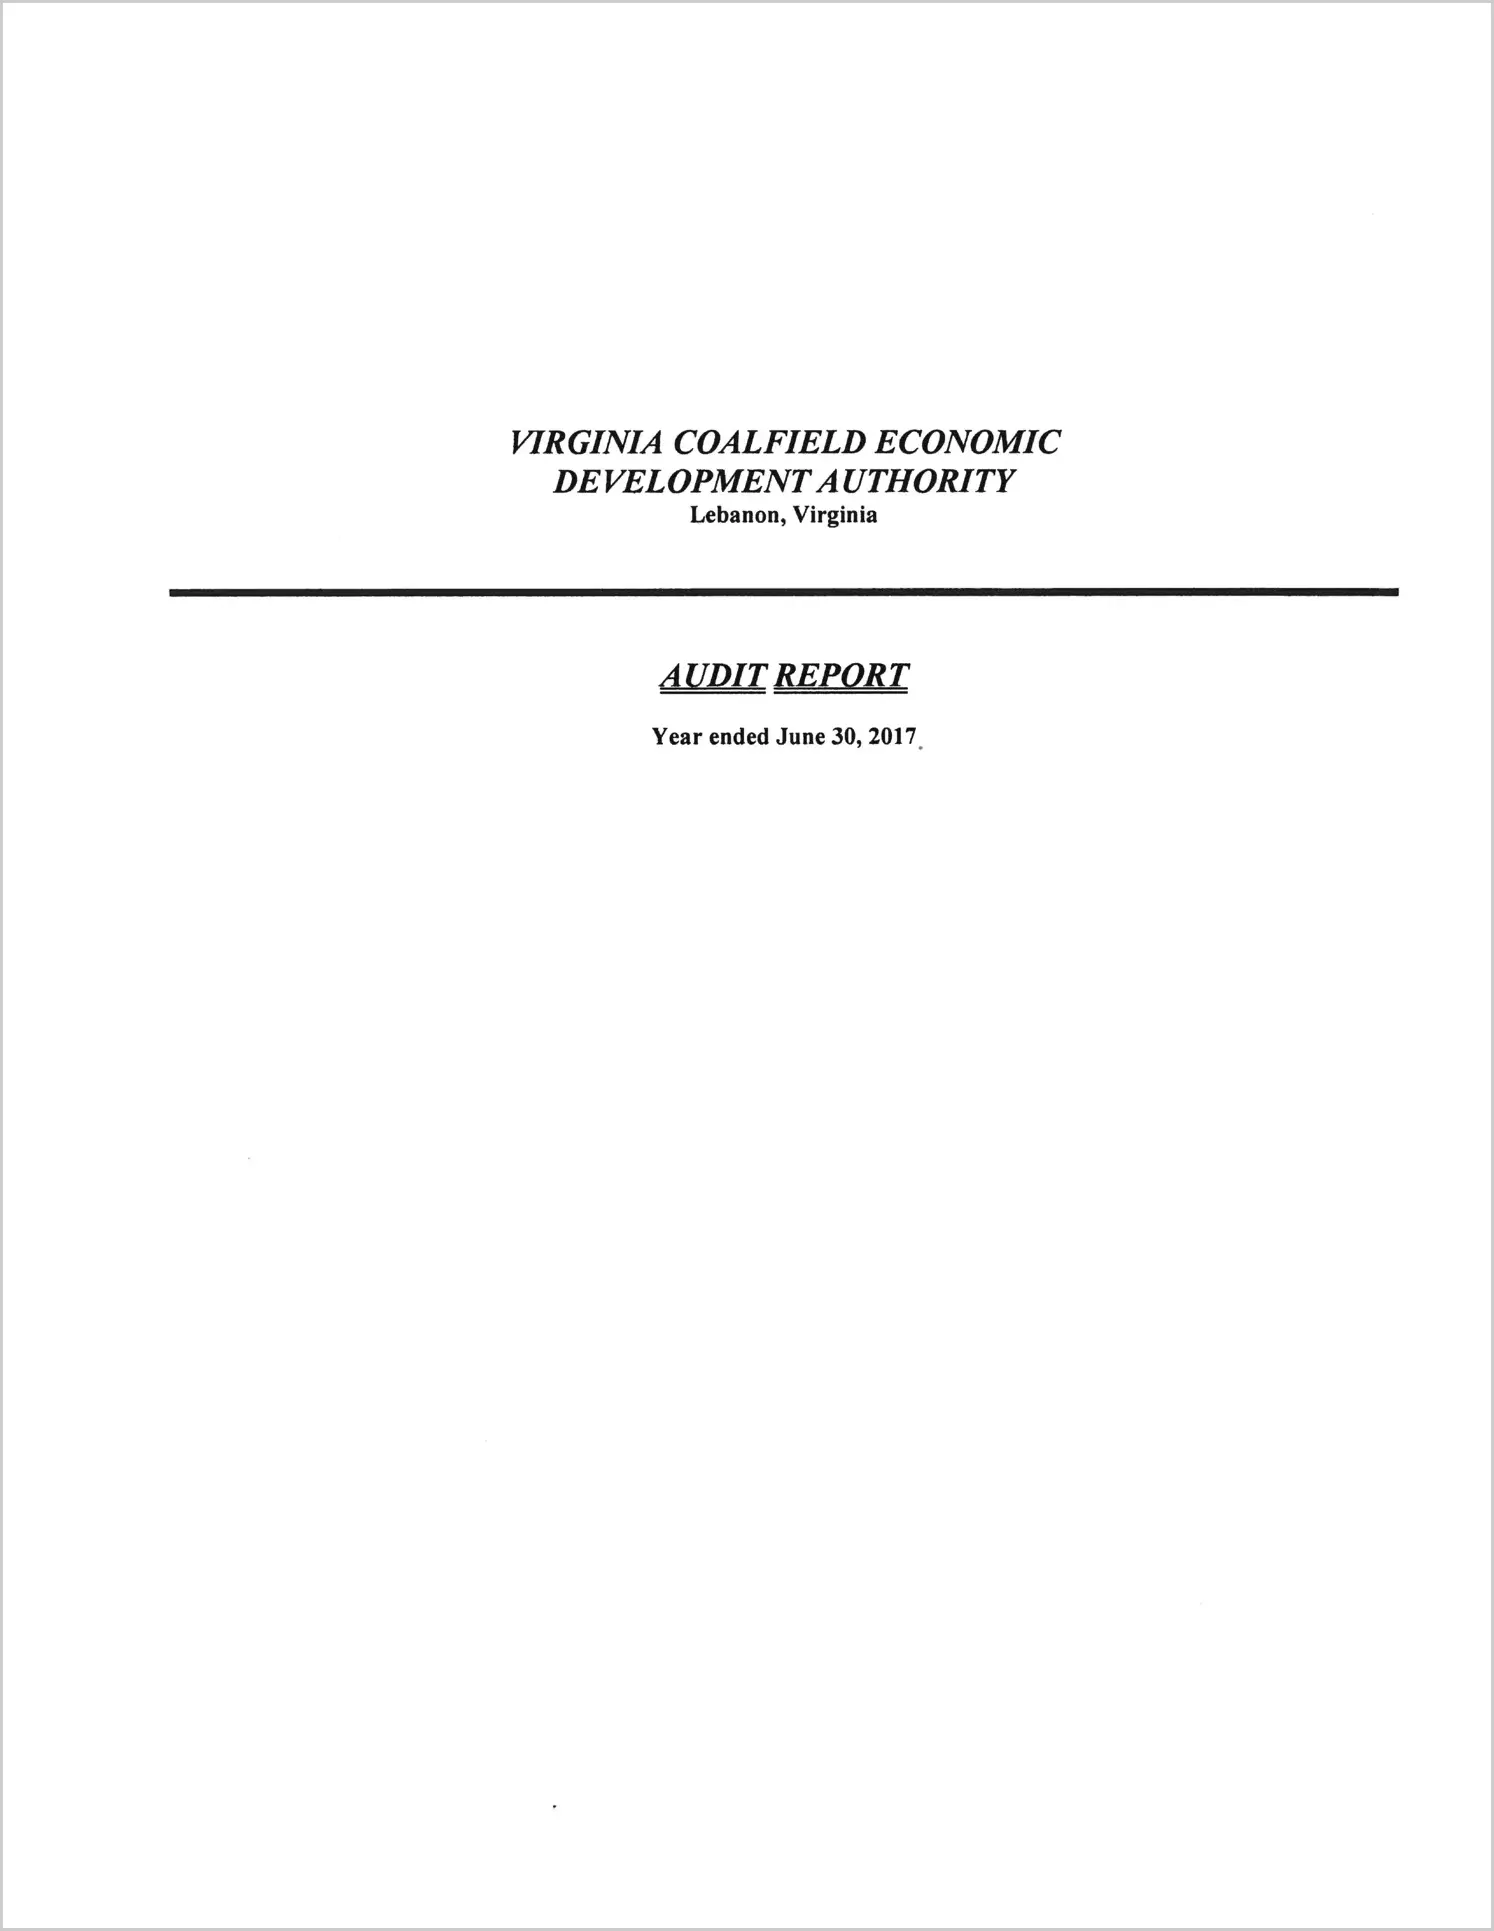 2017 ABC/Other Annual Financial Report  for Virginia Coalfield Economic Development Authority